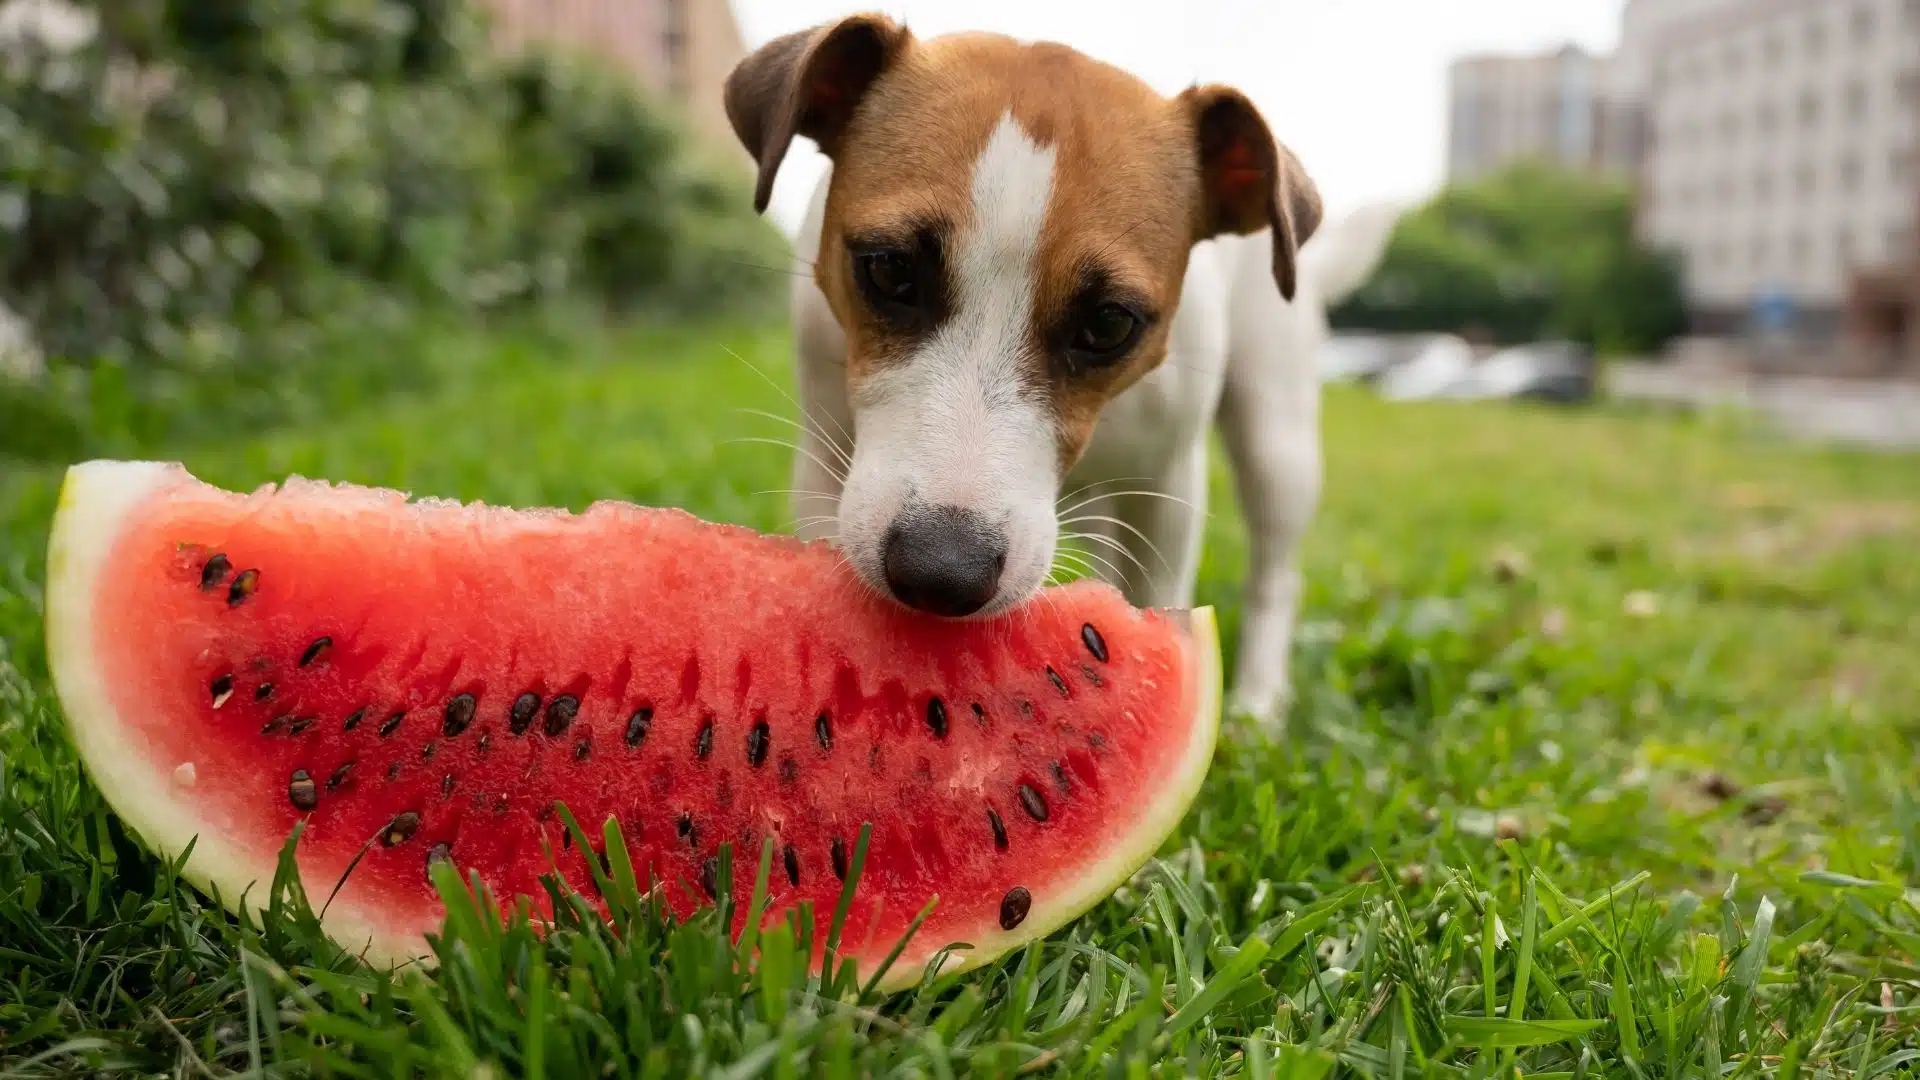 Can Dogs Eat Watermelon? Our Vet Weighs In